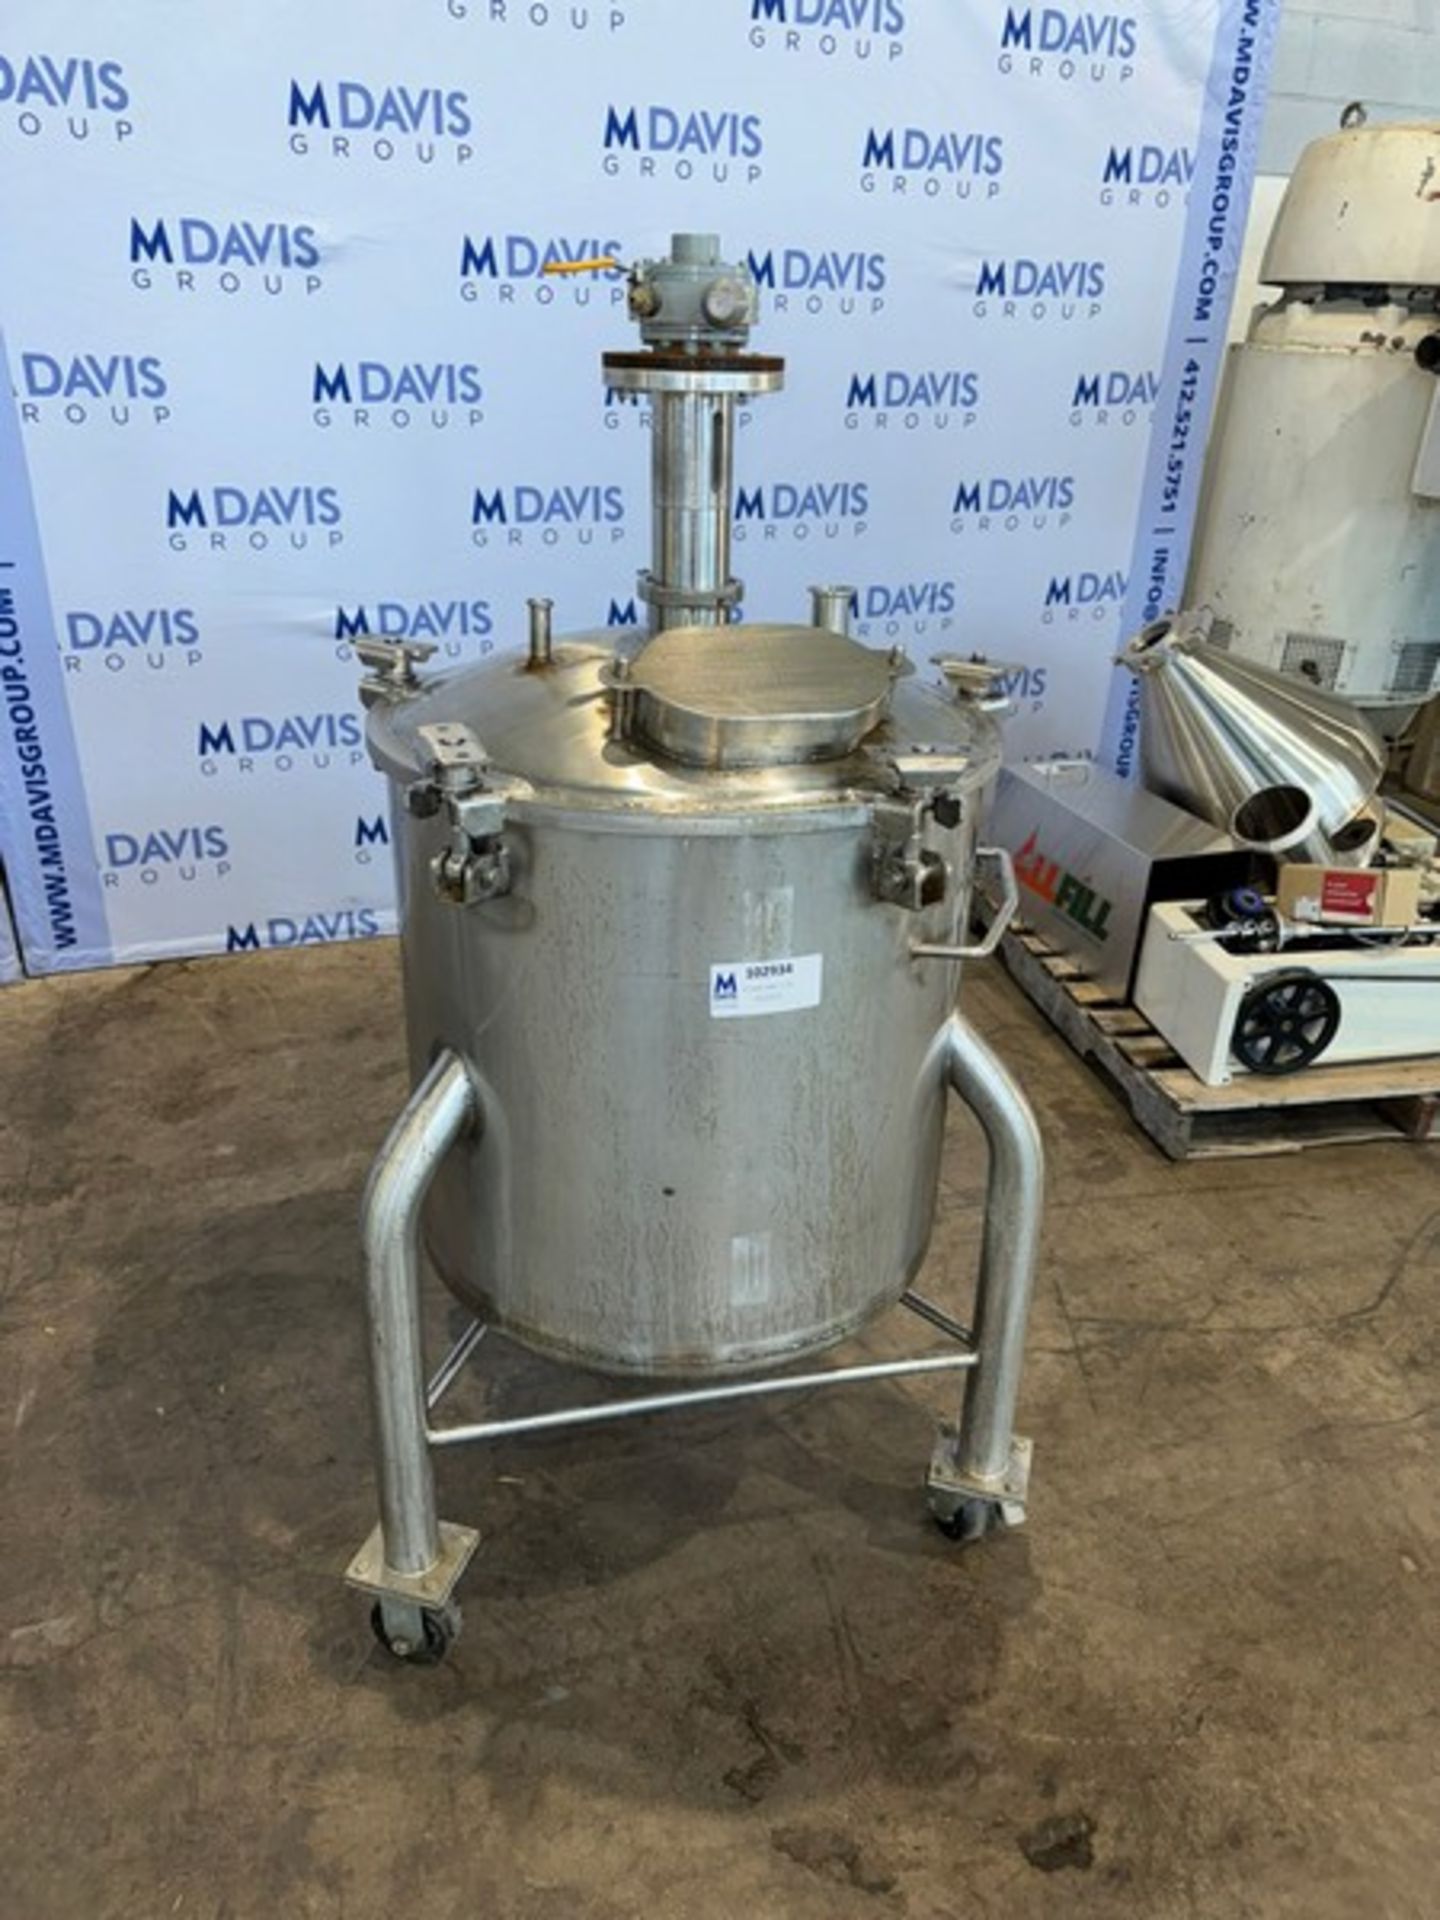 Aprox. 50 Gal. S/S Single Wall Mix Tank, Vessel Dims.: Aprox. 22" Deep x 24" Dia., with Vertical S/S